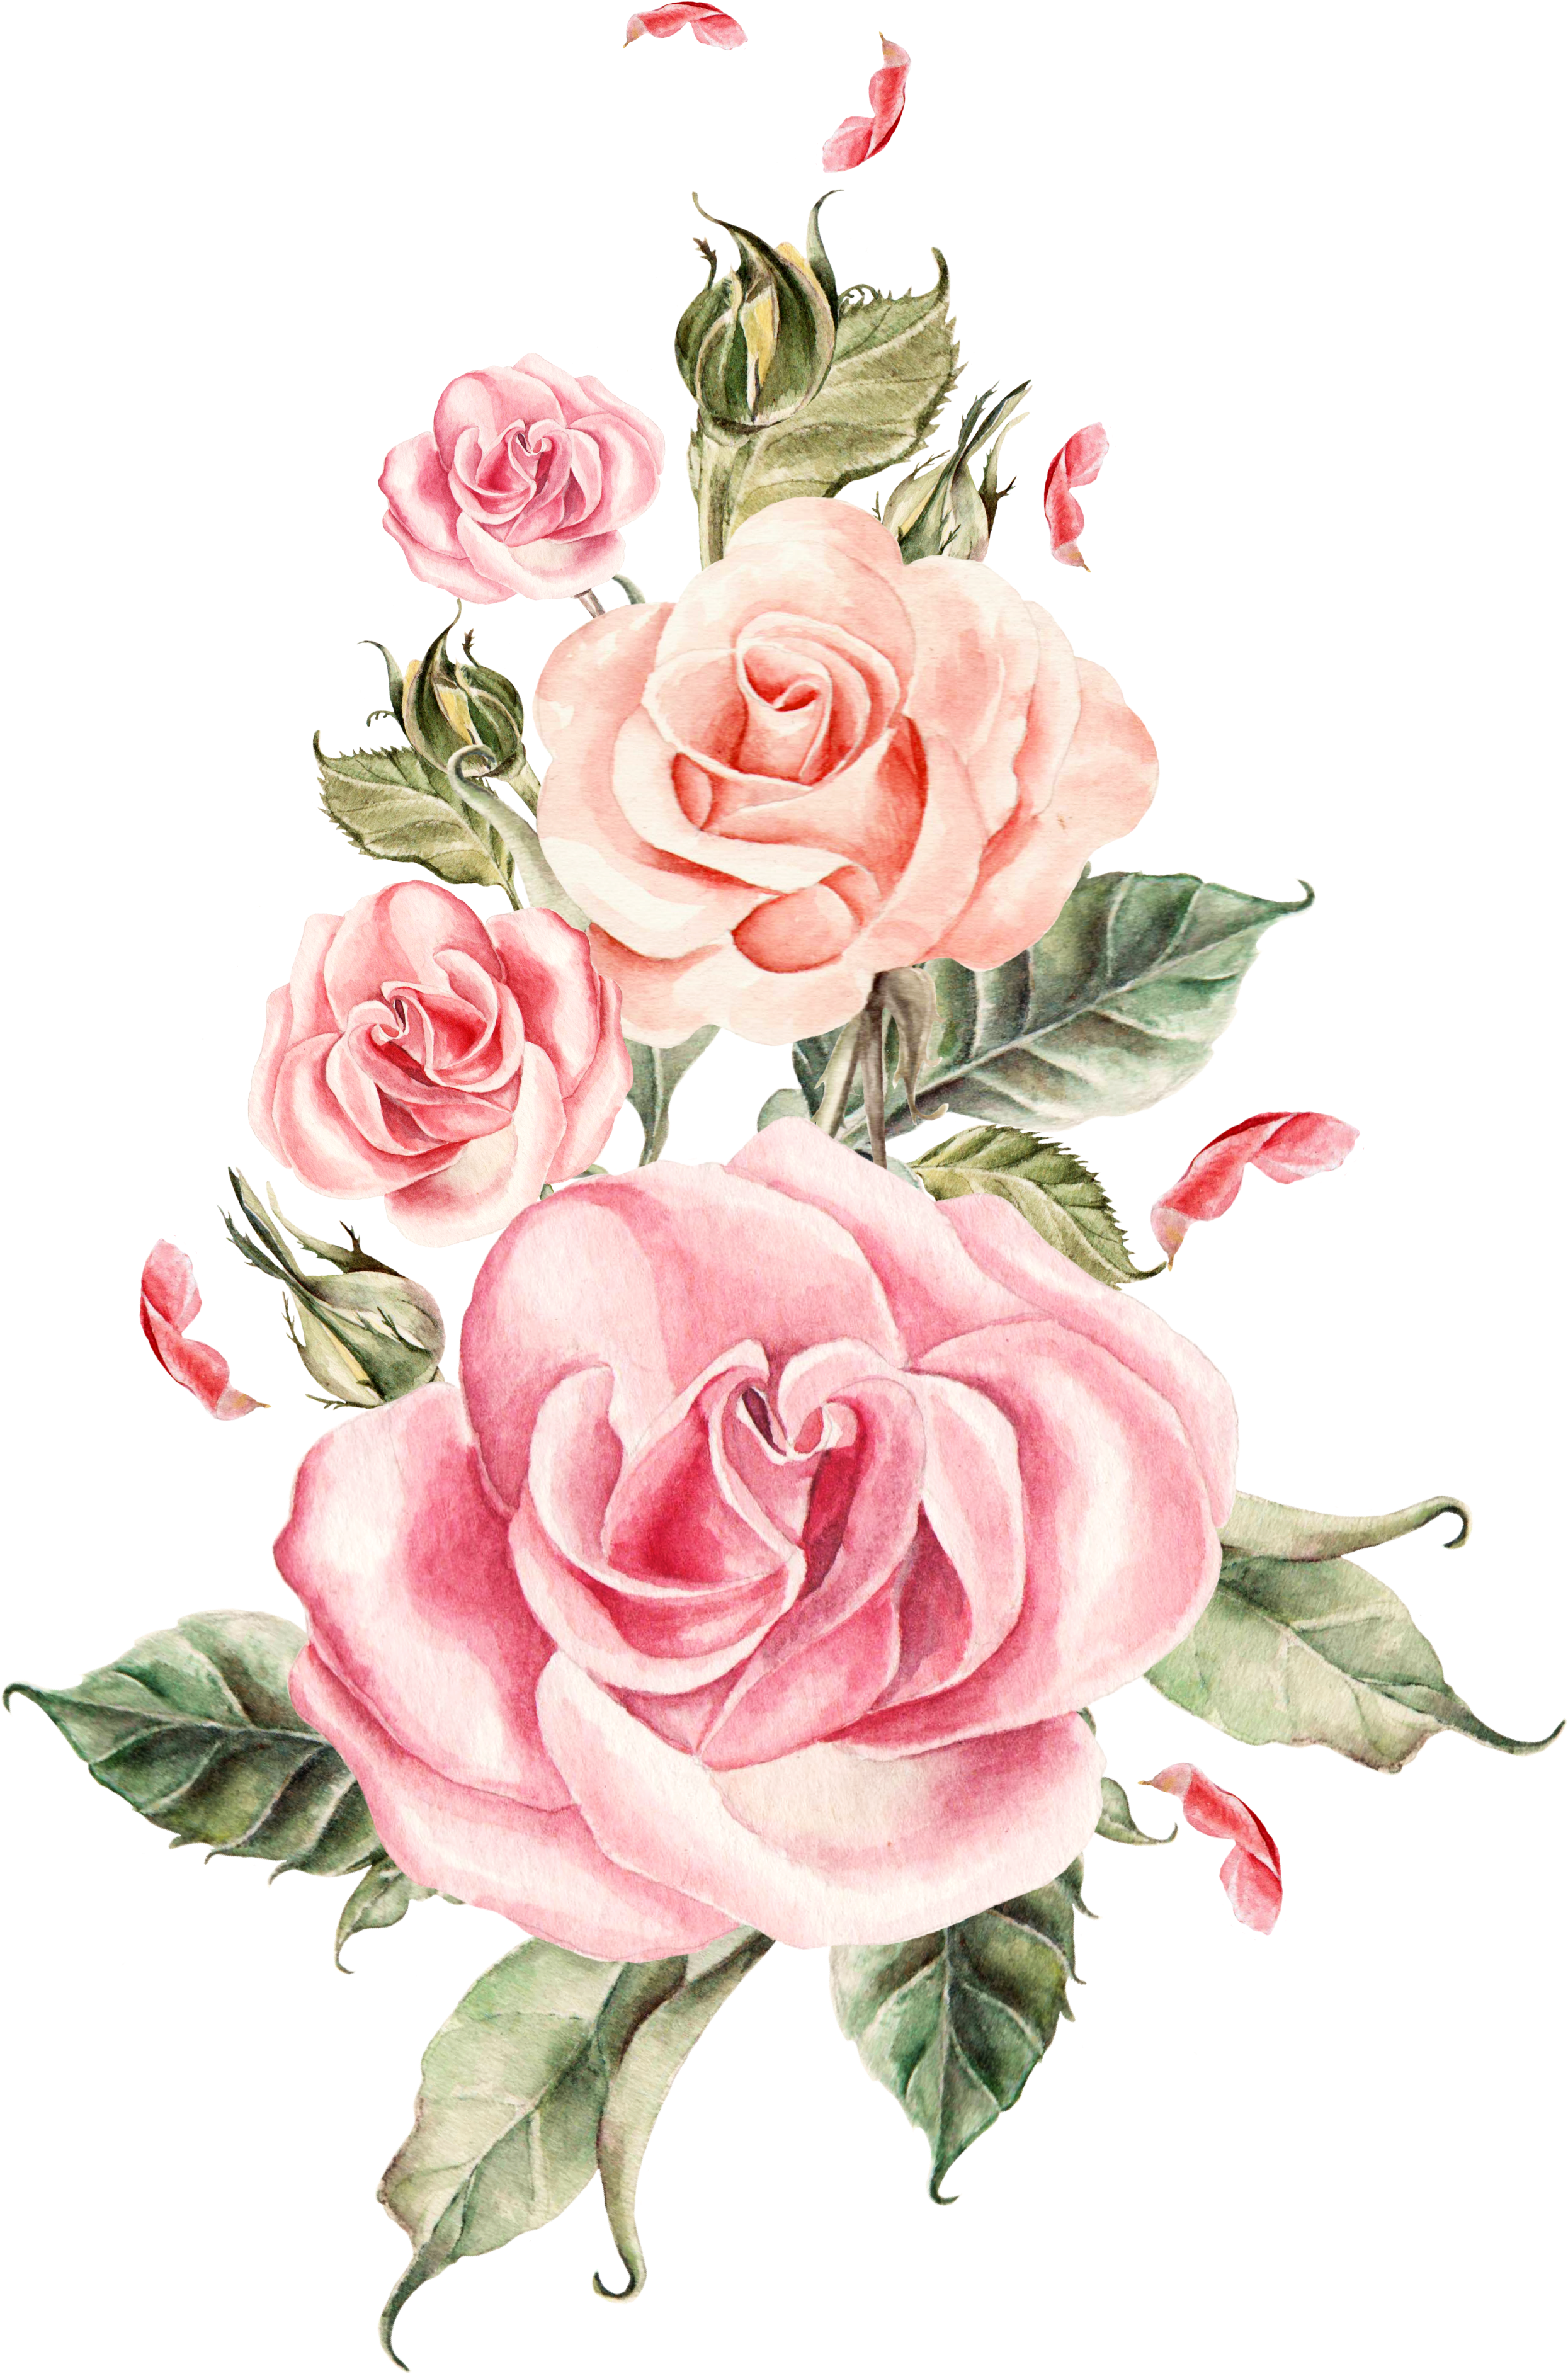 A Group Of Pink Roses And Leaves